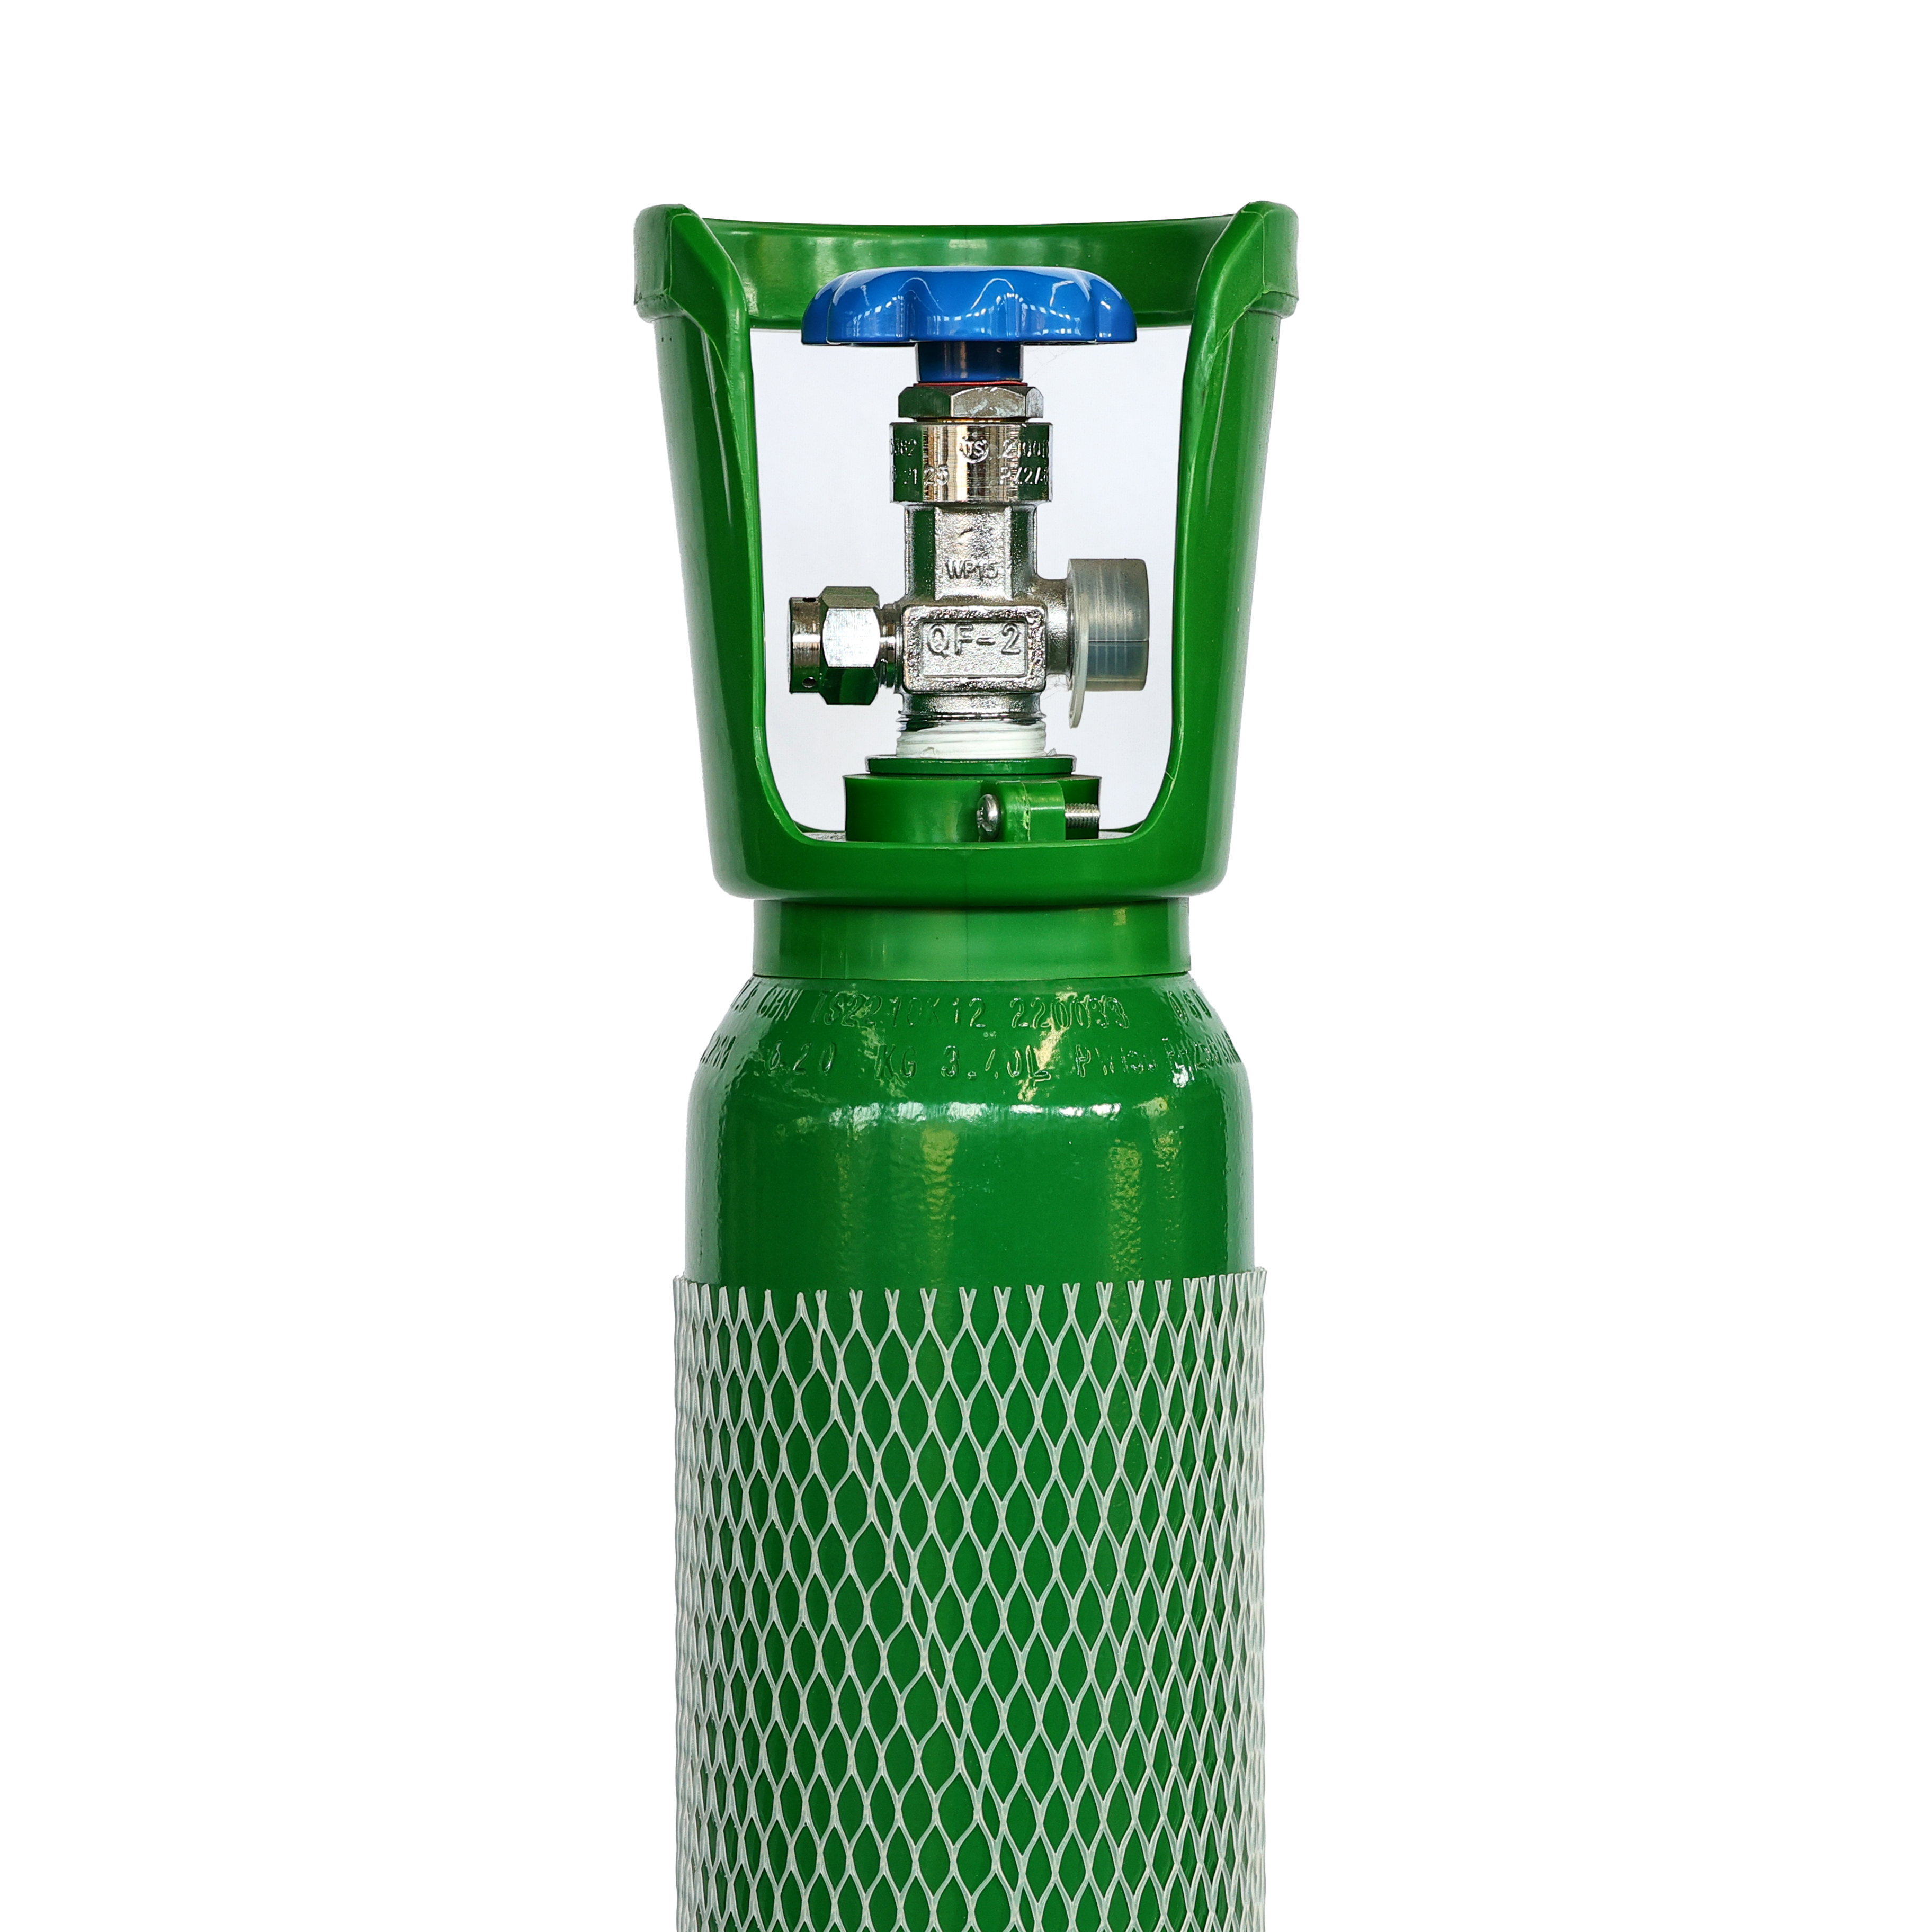 10L 200Bar ISO9809 TPED Standard Seamless Steel Cylinder Gas Cylinder